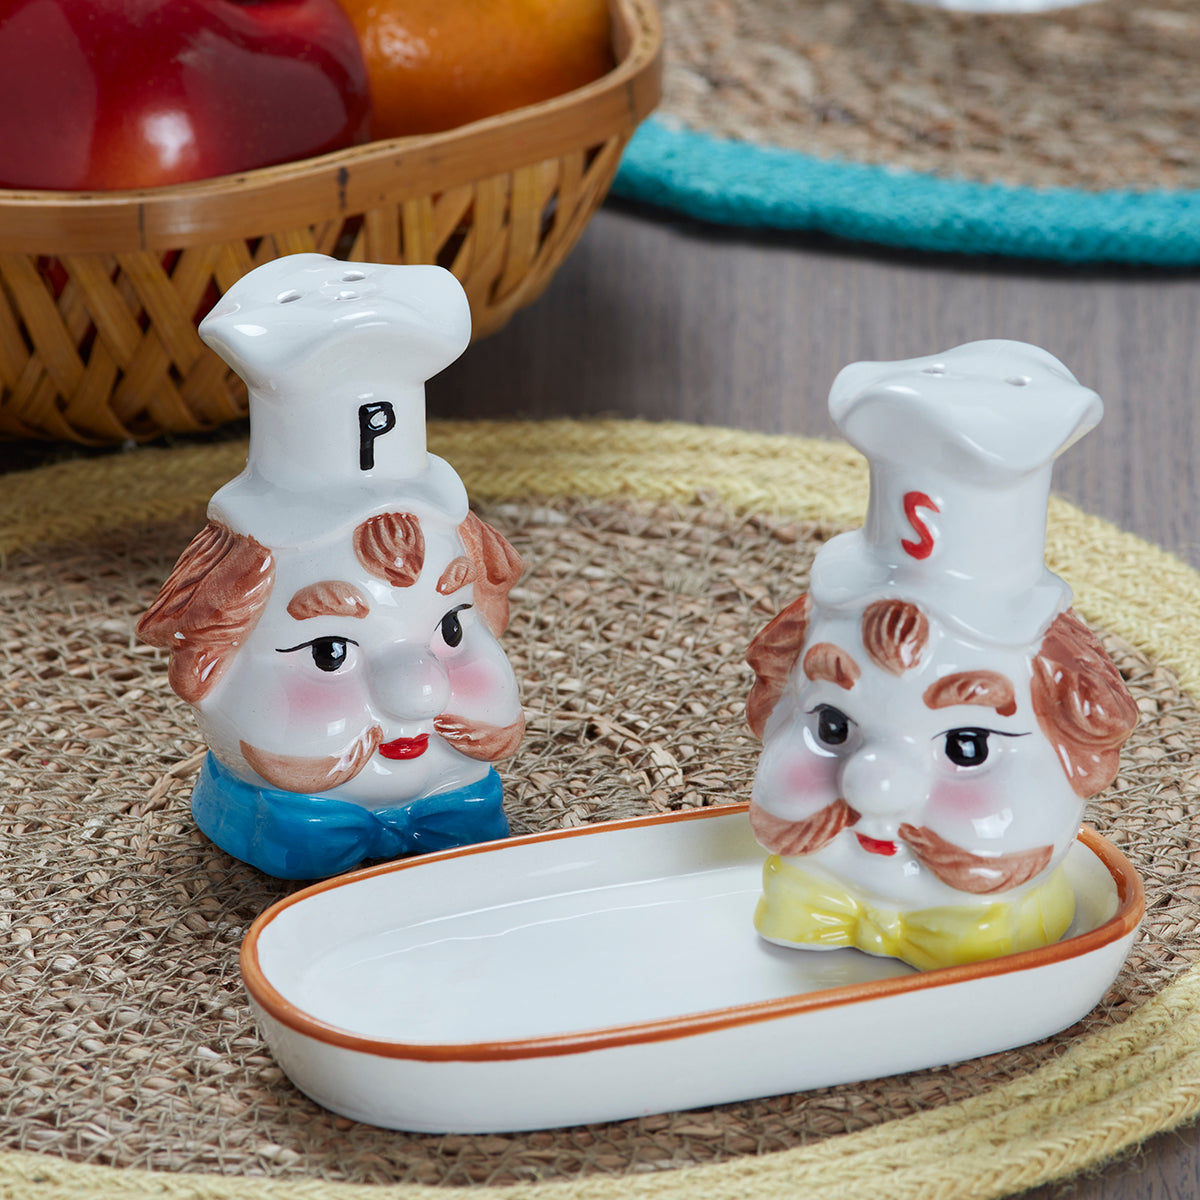 Ceramic Salt Pepper Container Set with tray for Dining Table (9974)